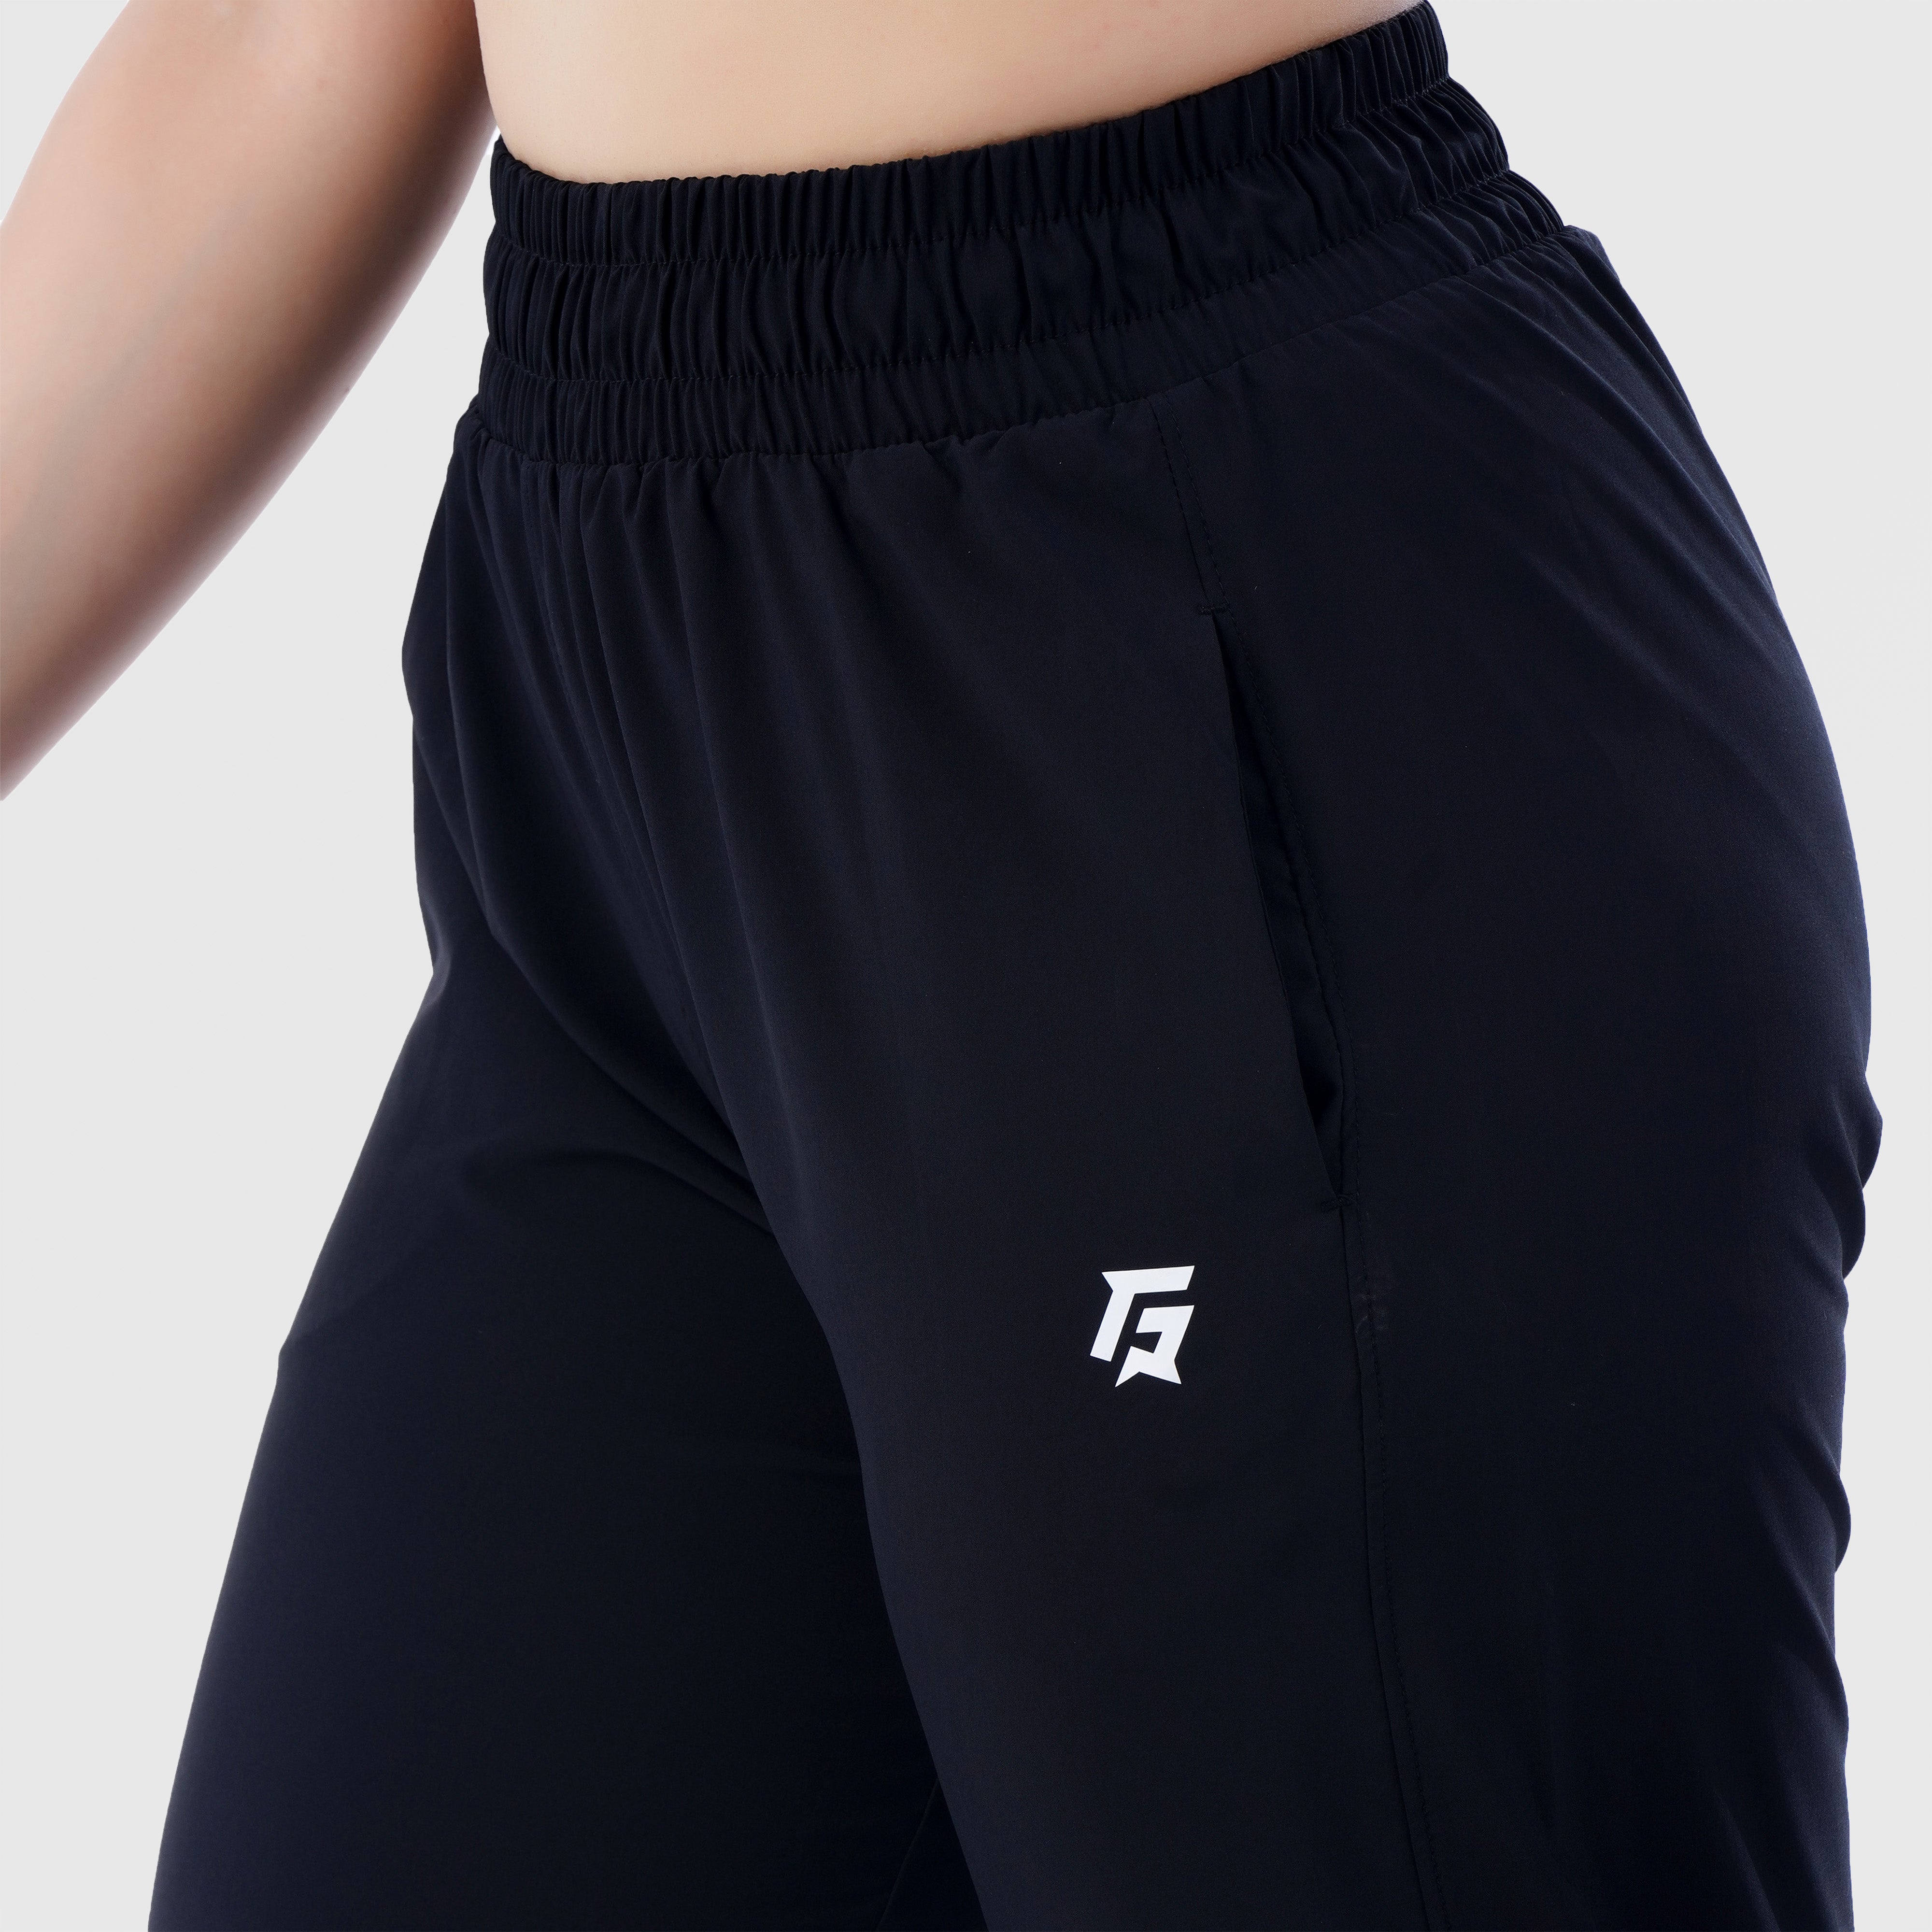 ActiveStride 7/8 Trousers (Black)